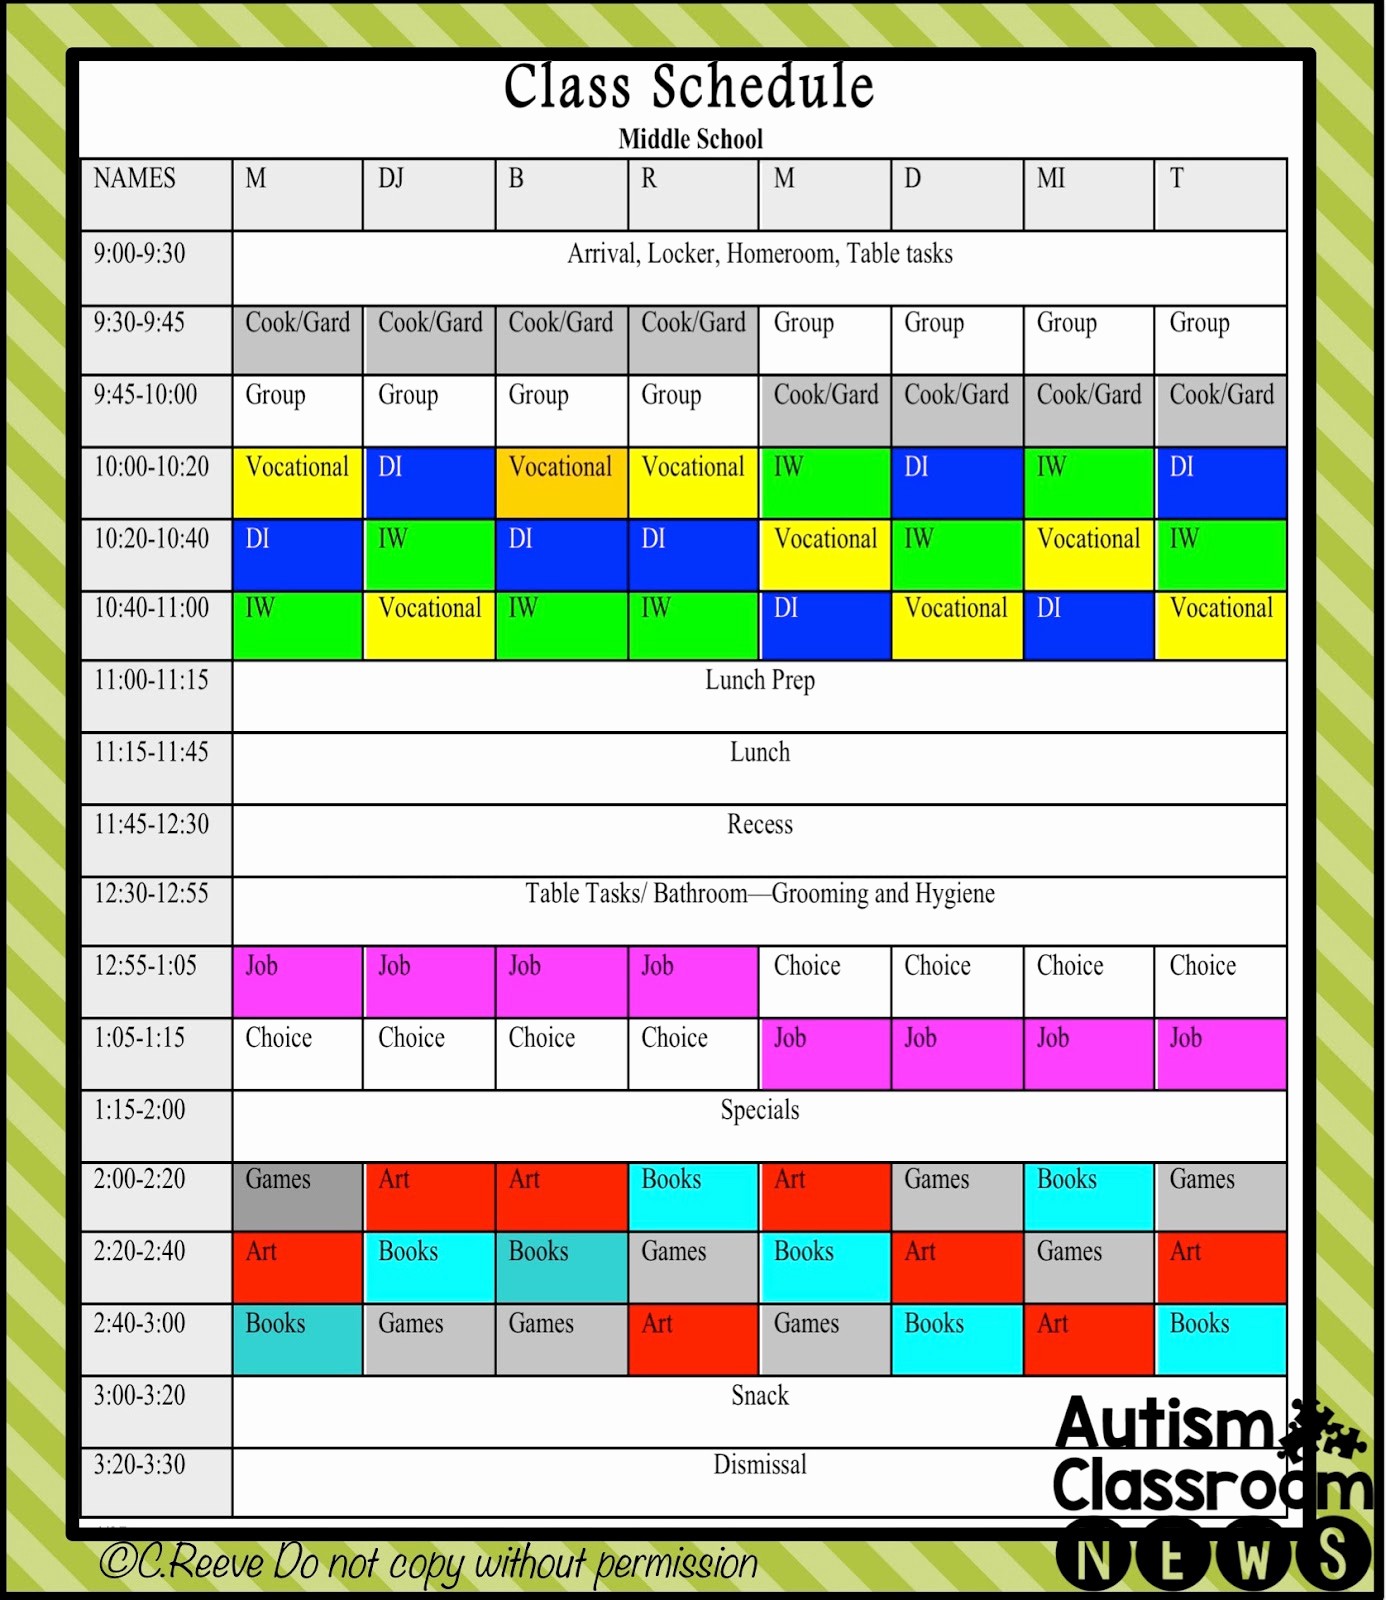 High School Class Schedule Example Fresh 5 Examples Of Setting Classroom Schedules In Special